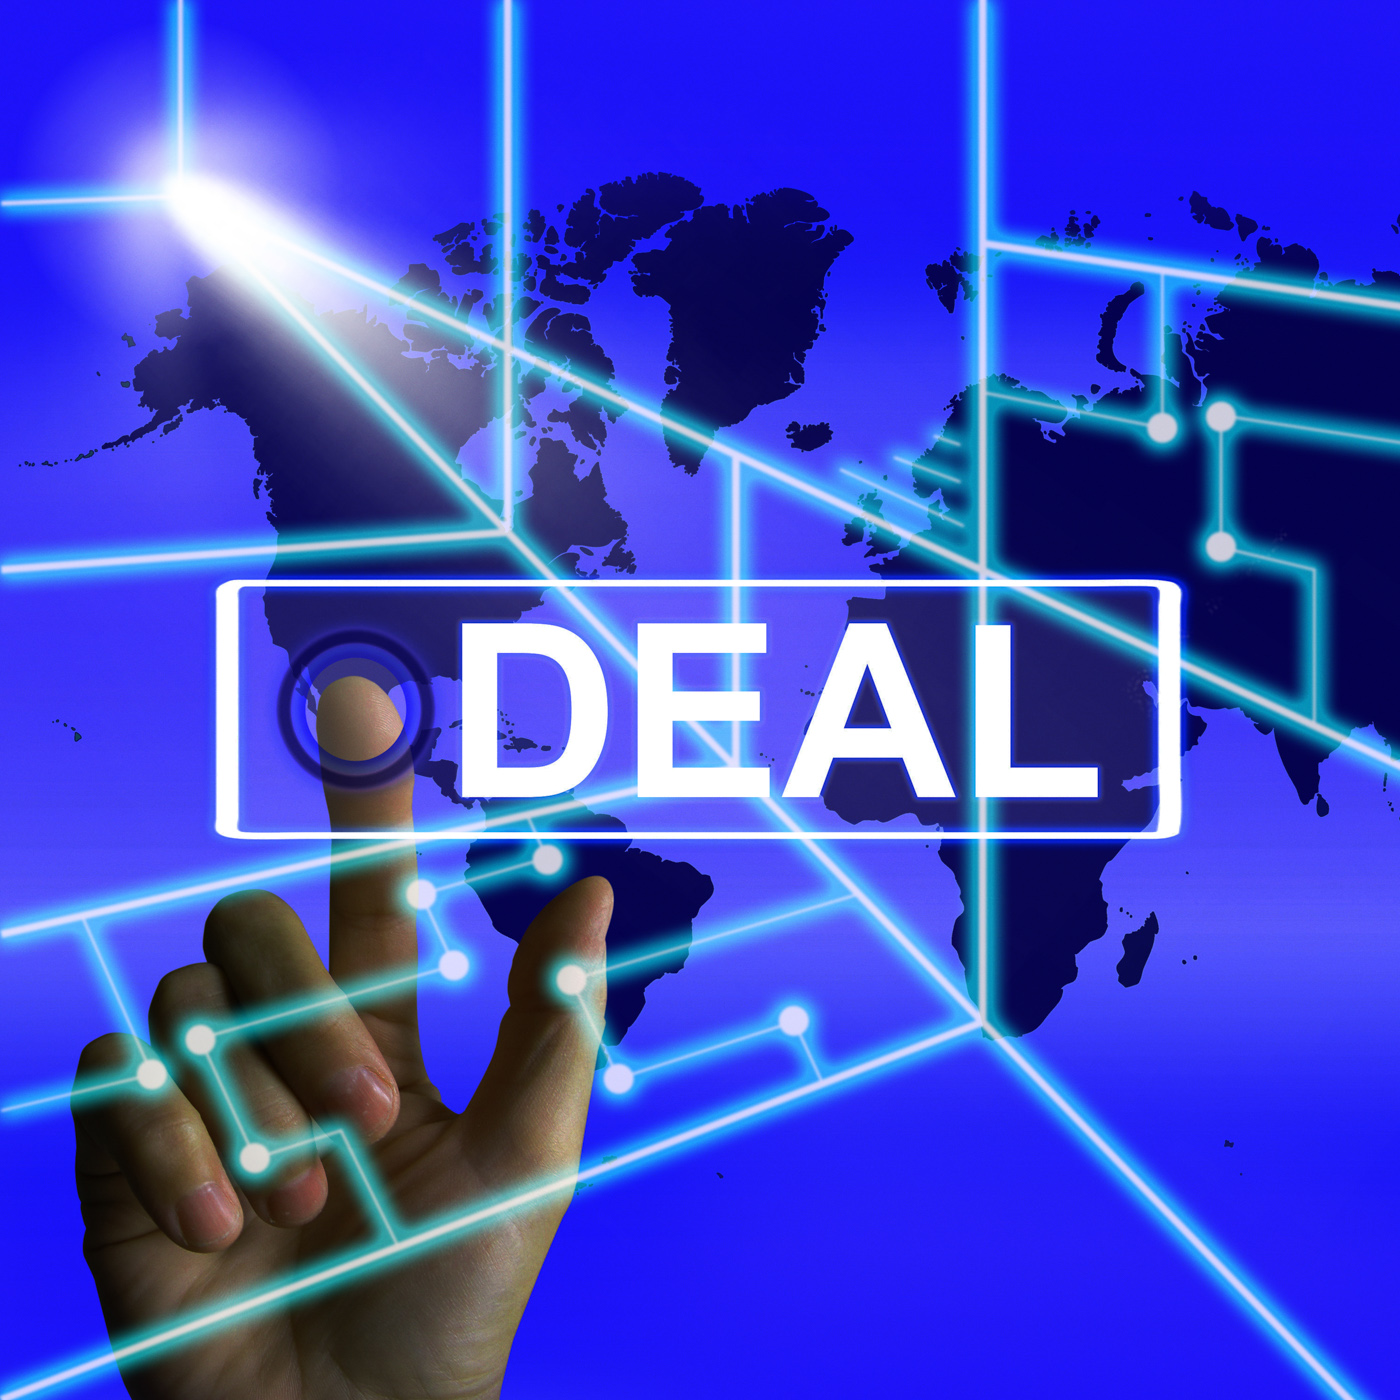 Deal screen refers to worldwide or international agreement photo